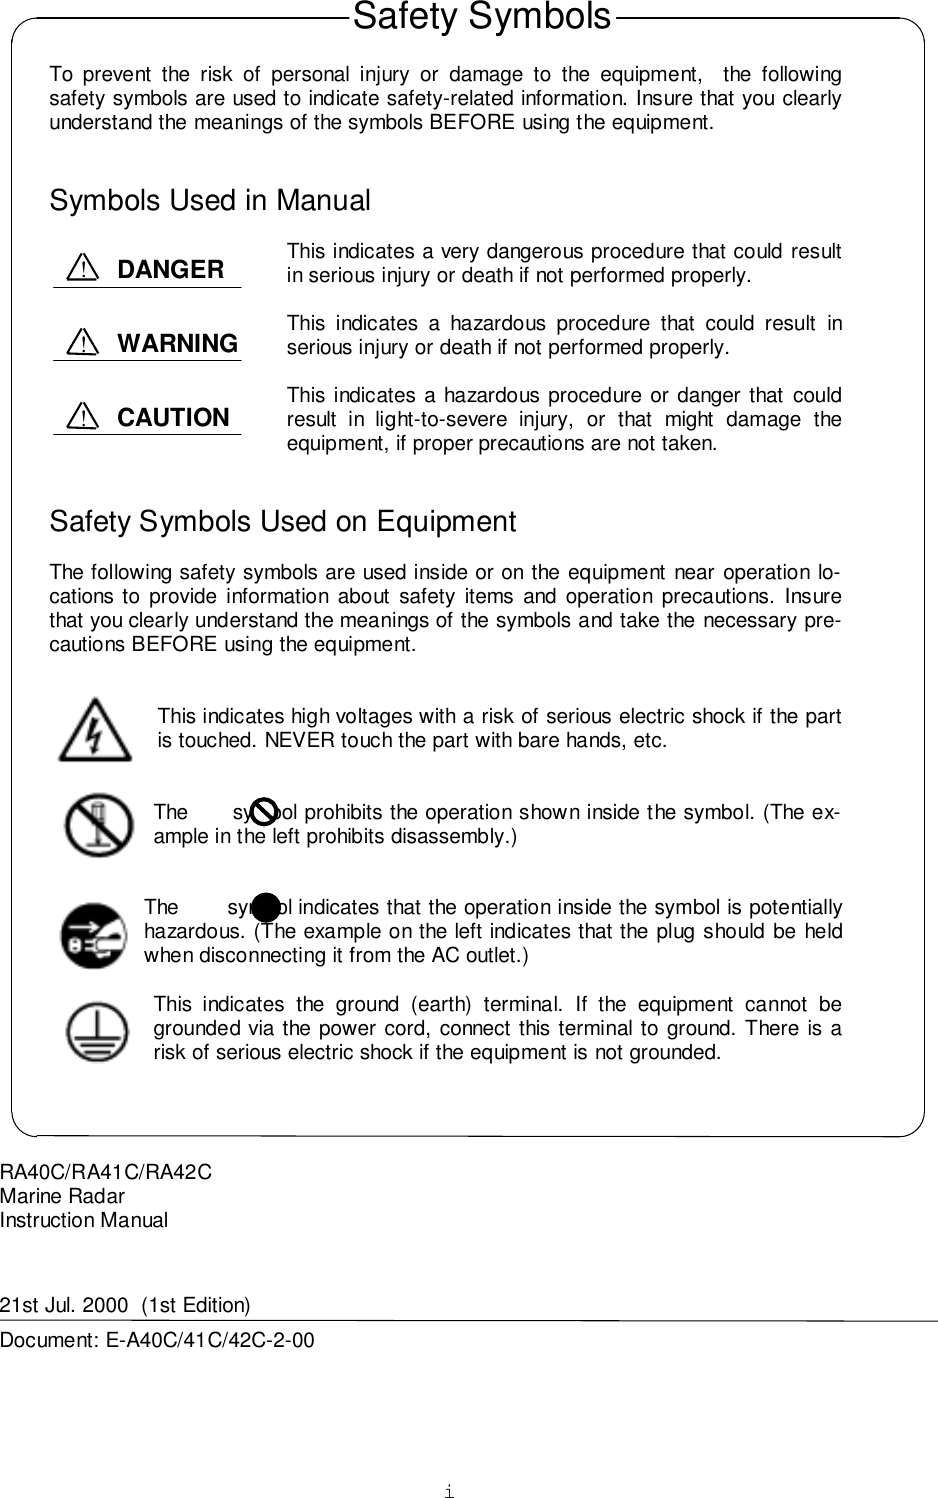 iTo prevent the risk of personal injury or damage to the equipment,  the followingsafety symbols are used to indicate safety-related information. Insure that you clearlyunderstand the meanings of the symbols BEFORE using the equipment.Symbols Used in ManualThis indicates a very dangerous procedure that could resultin serious injury or death if not performed properly.This indicates a hazardous procedure that could result inserious injury or death if not performed properly.This indicates a hazardous procedure or danger that couldresult in light-to-severe injury, or that might damage theequipment, if proper precautions are not taken.Safety Symbols Used on EquipmentThe following safety symbols are used inside or on the equipment near operation lo-cations to provide information about safety items and operation precautions. Insurethat you clearly understand the meanings of the symbols and take the necessary pre-cautions BEFORE using the equipment.This indicates high voltages with a risk of serious electric shock if the partis touched. NEVER touch the part with bare hands, etc.The       symbol prohibits the operation shown inside the symbol. (The ex-ample in the left prohibits disassembly.)The        symbol indicates that the operation inside the symbol is potentiallyhazardous. (The example on the left indicates that the plug should be heldwhen disconnecting it from the AC outlet.)This indicates the ground (earth) terminal. If the equipment cannot begrounded via the power cord, connect this terminal to ground. There is arisk of serious electric shock if the equipment is not grounded.RA40C/RA41C/RA42CMarine RadarInstruction Manual21st Jul. 2000  (1st Edition)Document: E-A40C/41C/42C-2-00Safety SymbolsDANGER!WARNING!CAUTION!